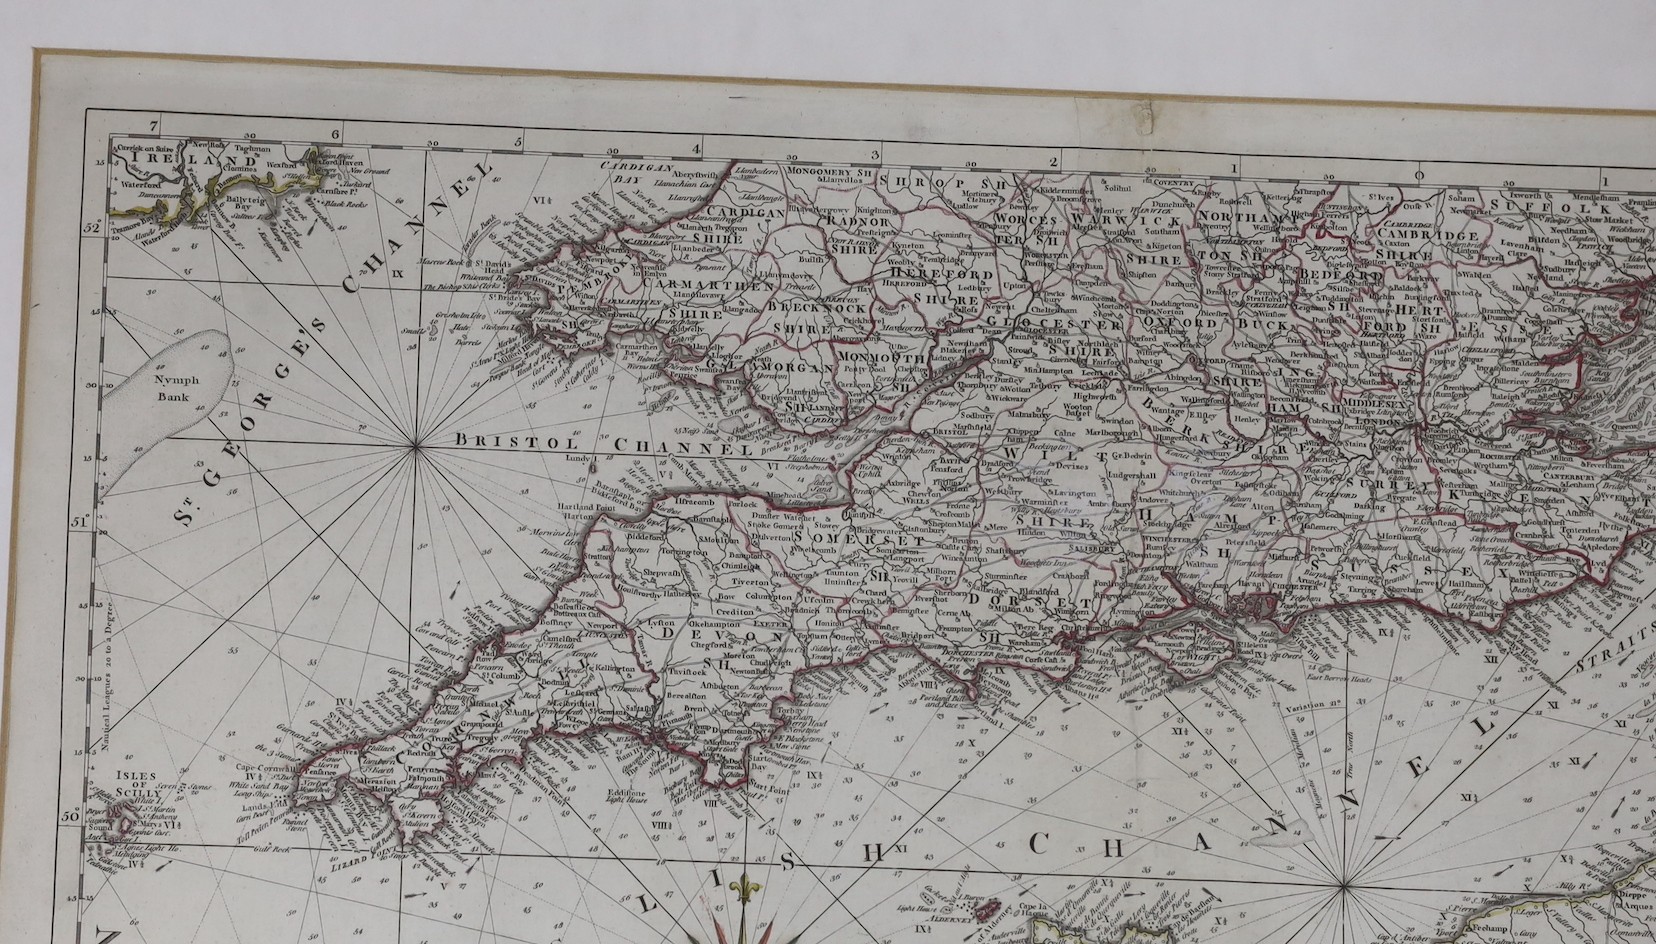 Carington Bowles, hand coloured engraving, Topographical Chart of the English Channel with it’s Environs, 53 x 72cm